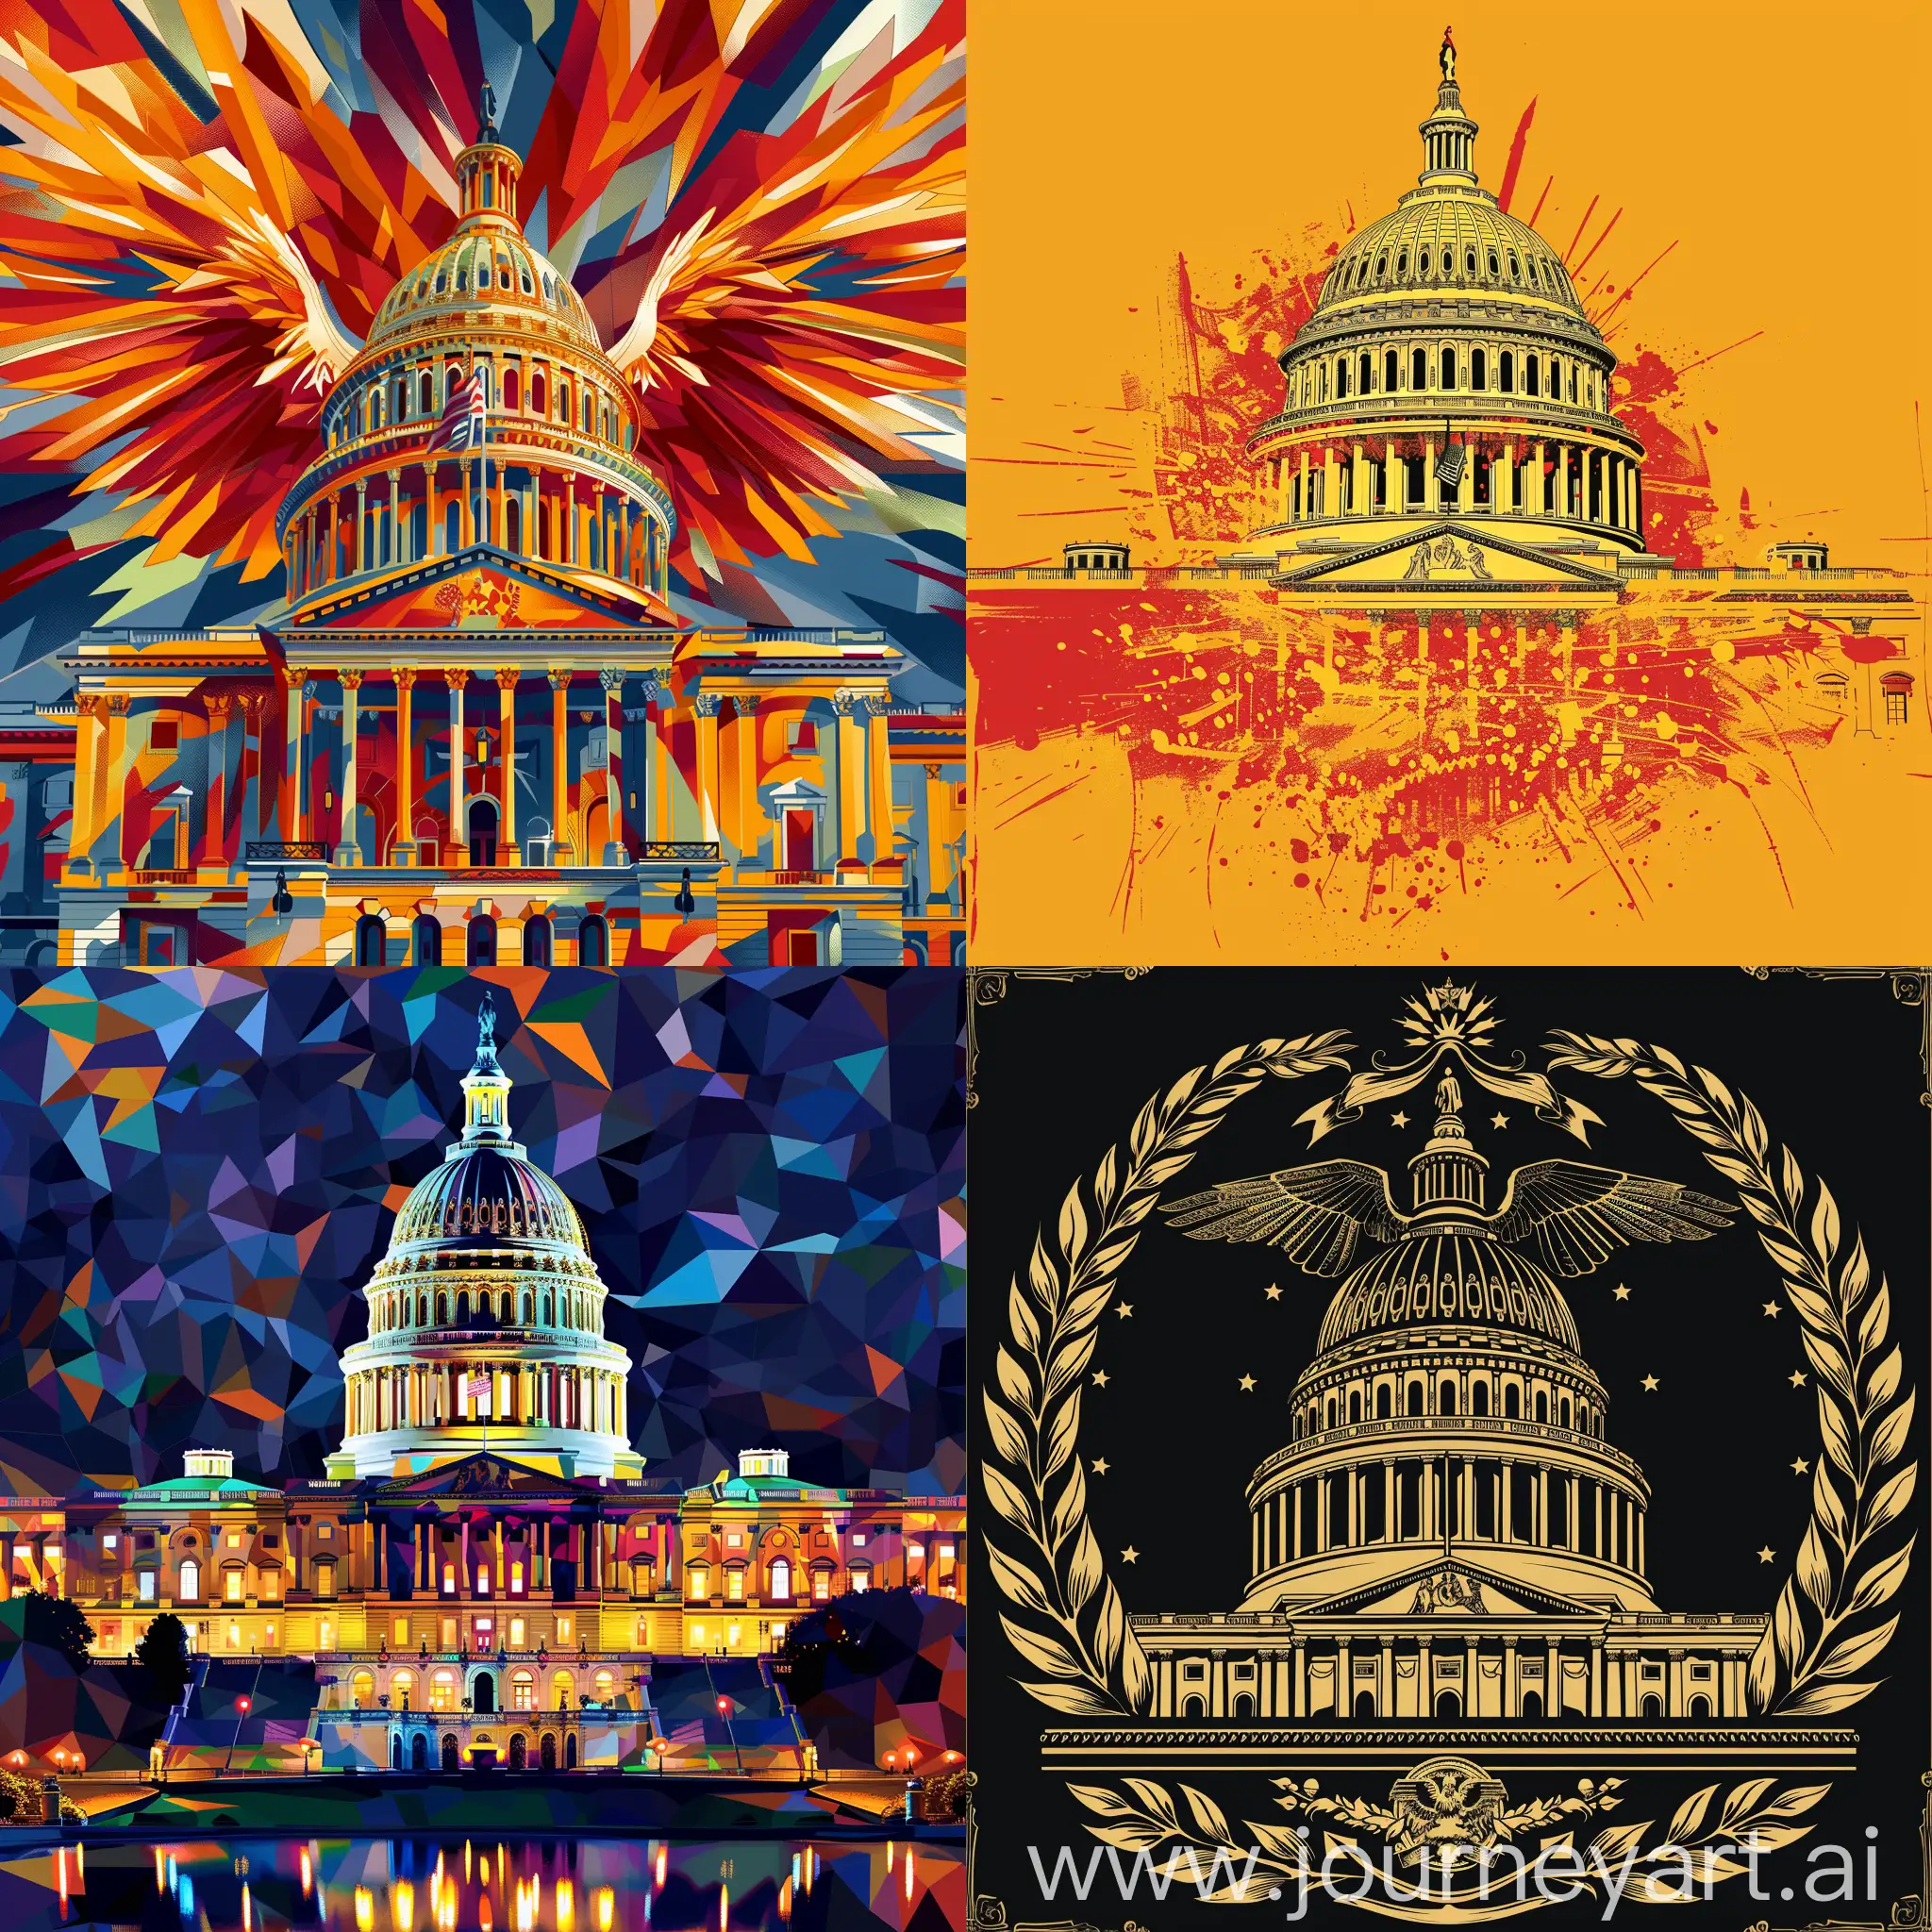 portrait abstract Capitol from Hunger Games, in vector

